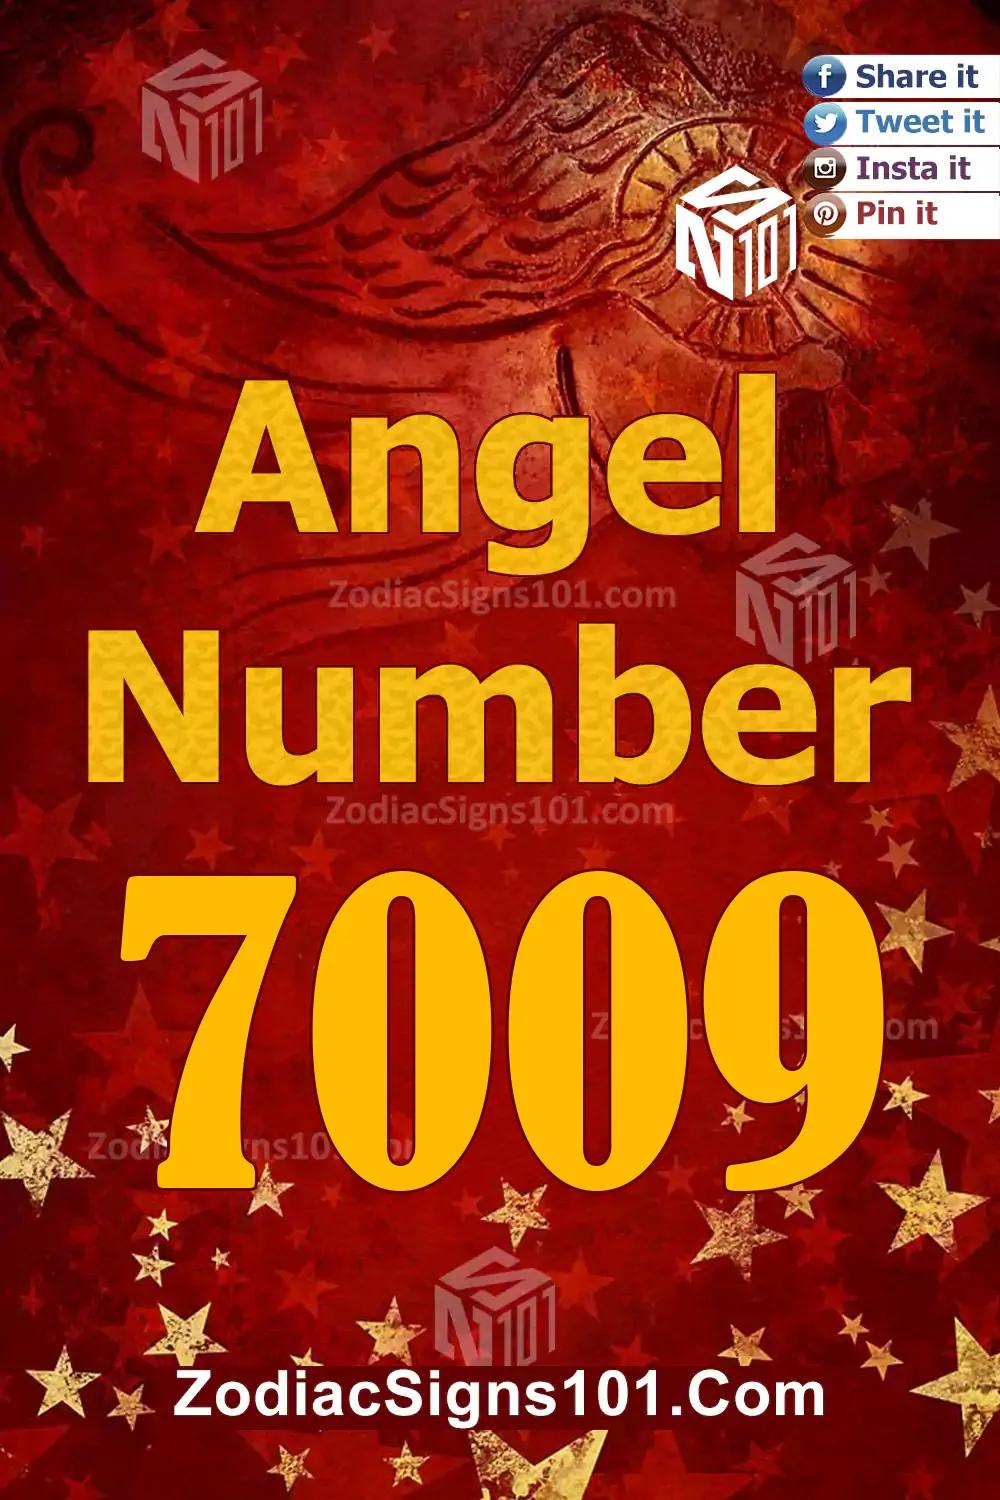 7009 Angel Number Meaning